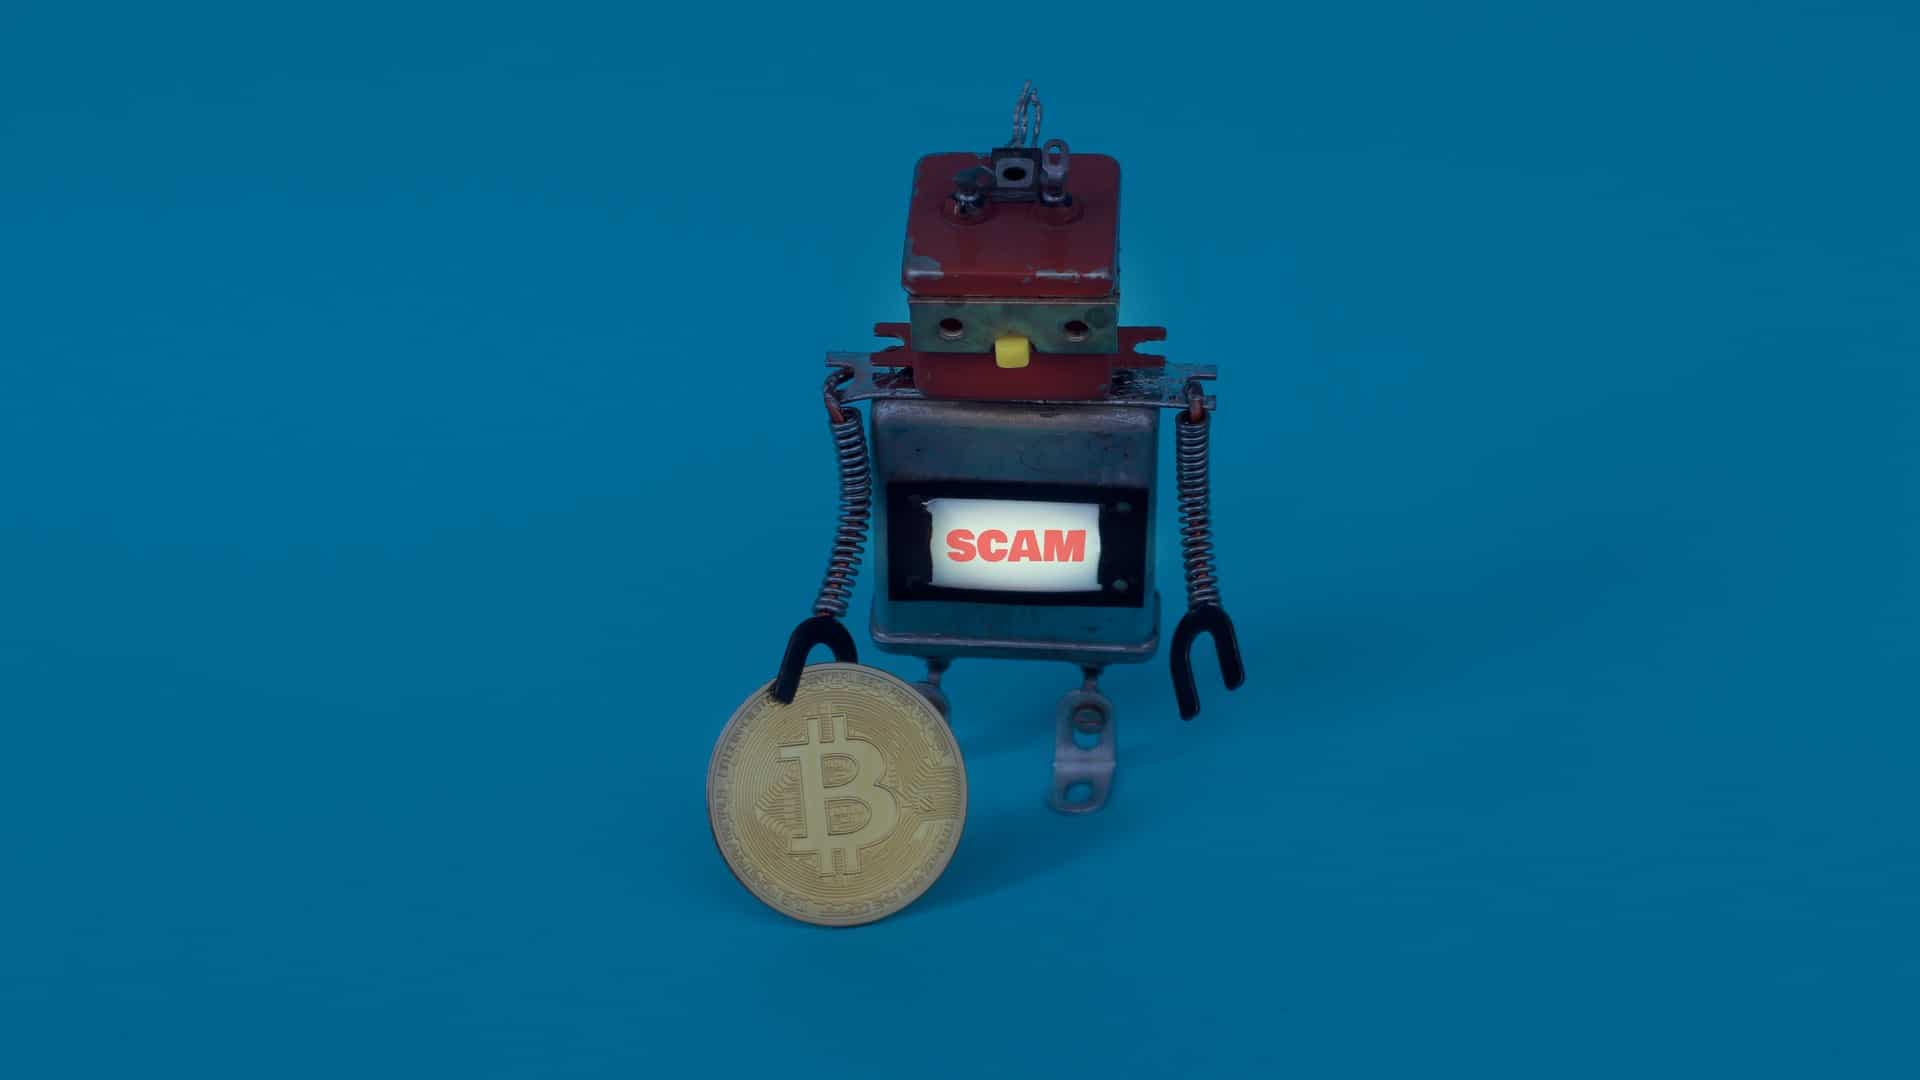 Brazilian investor loses emergency reserve in “Cryptocurrency Robot”